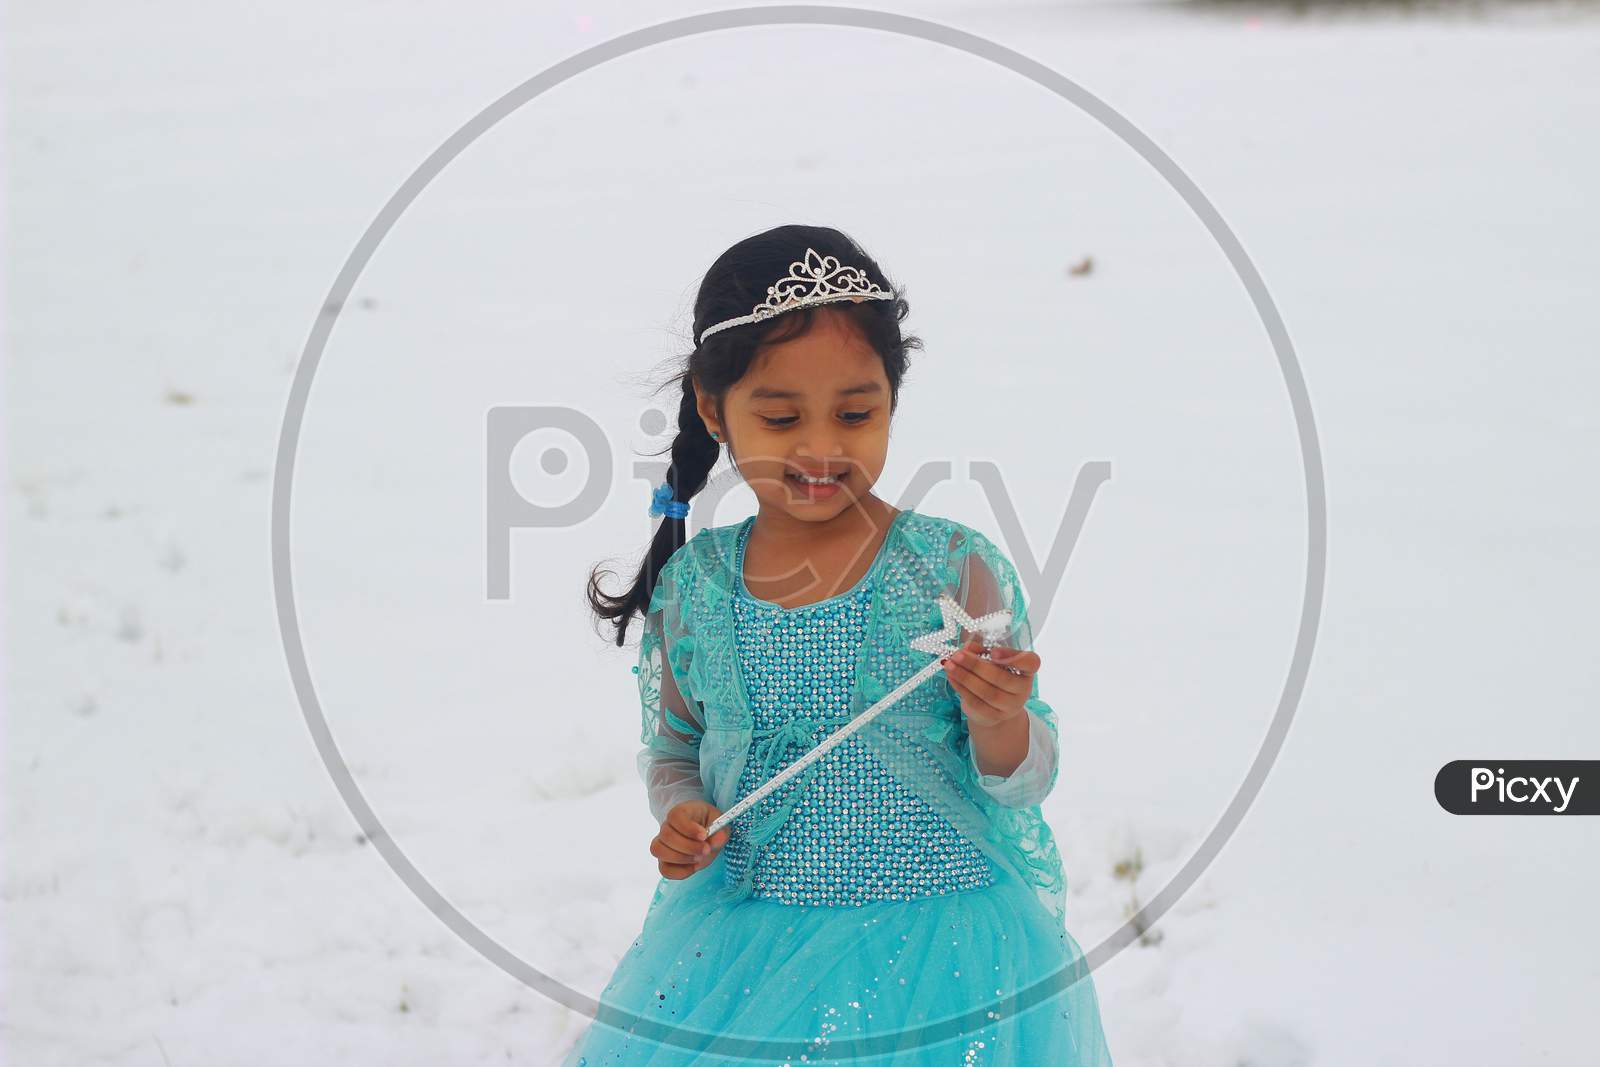 A little girl in a beautiful blue frock playing in the snow